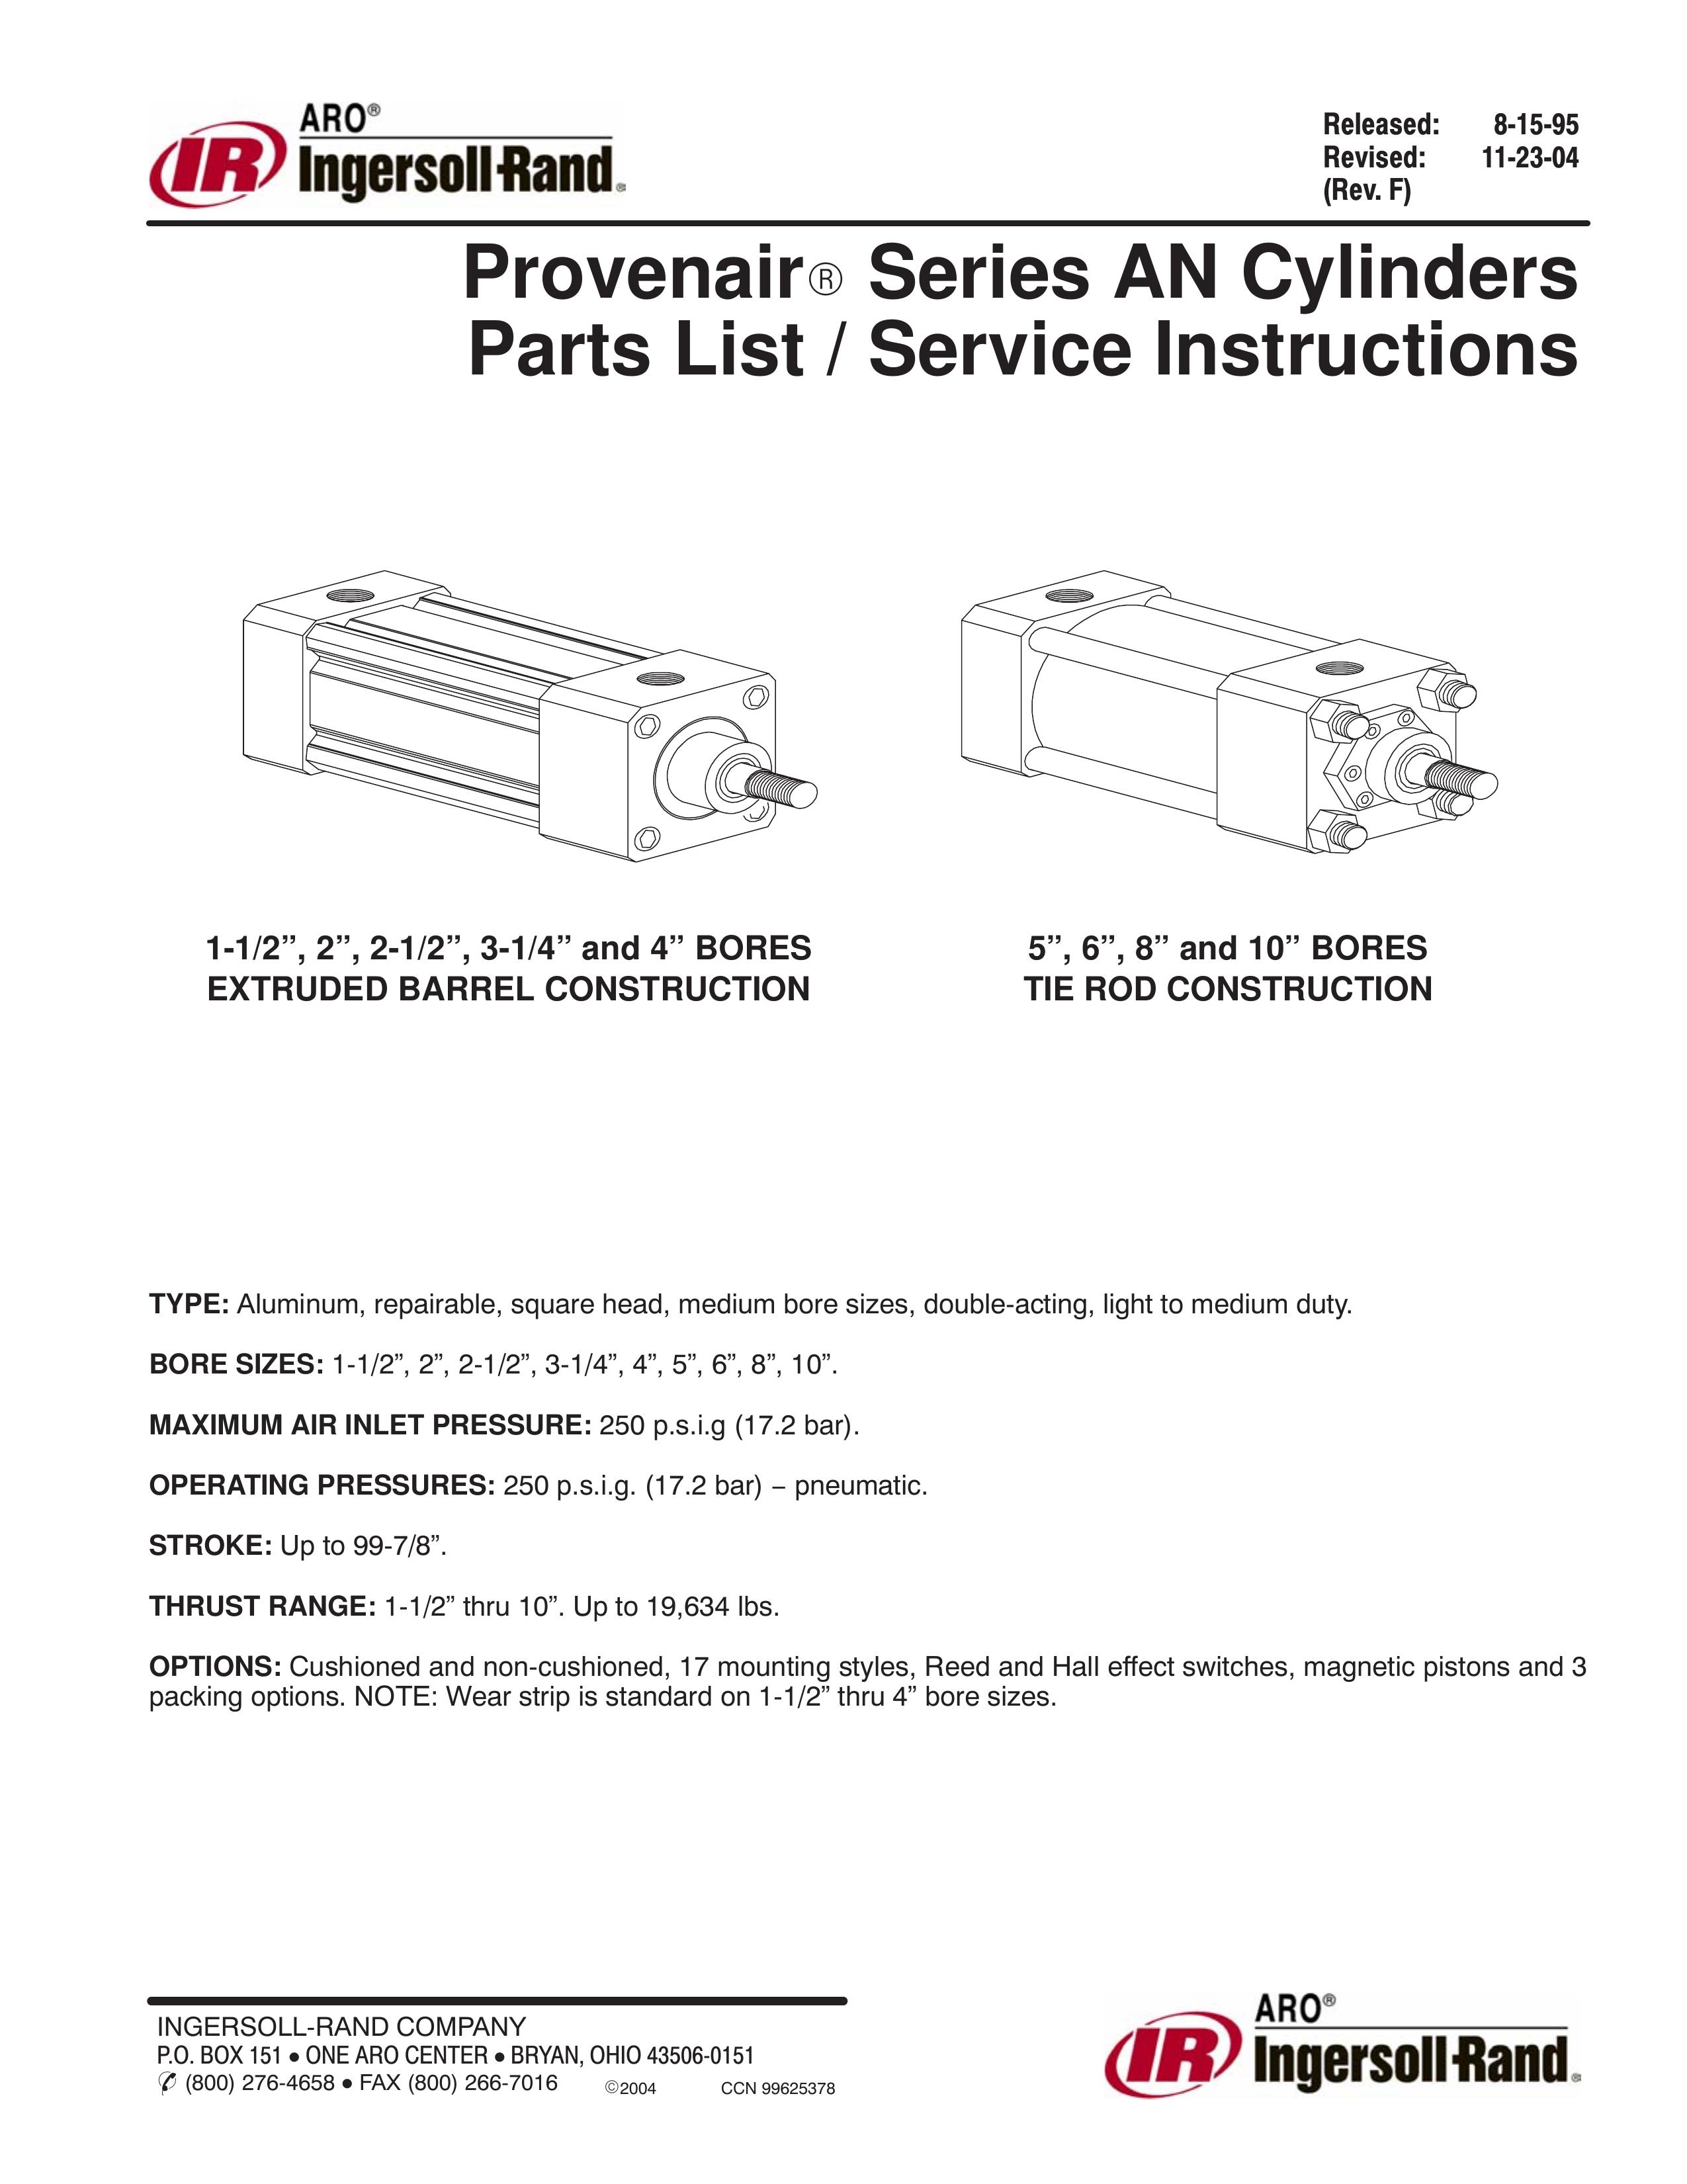 Ingersoll-Rand 3-1/4 and 4 BORES Marine Safety Devices User Manual